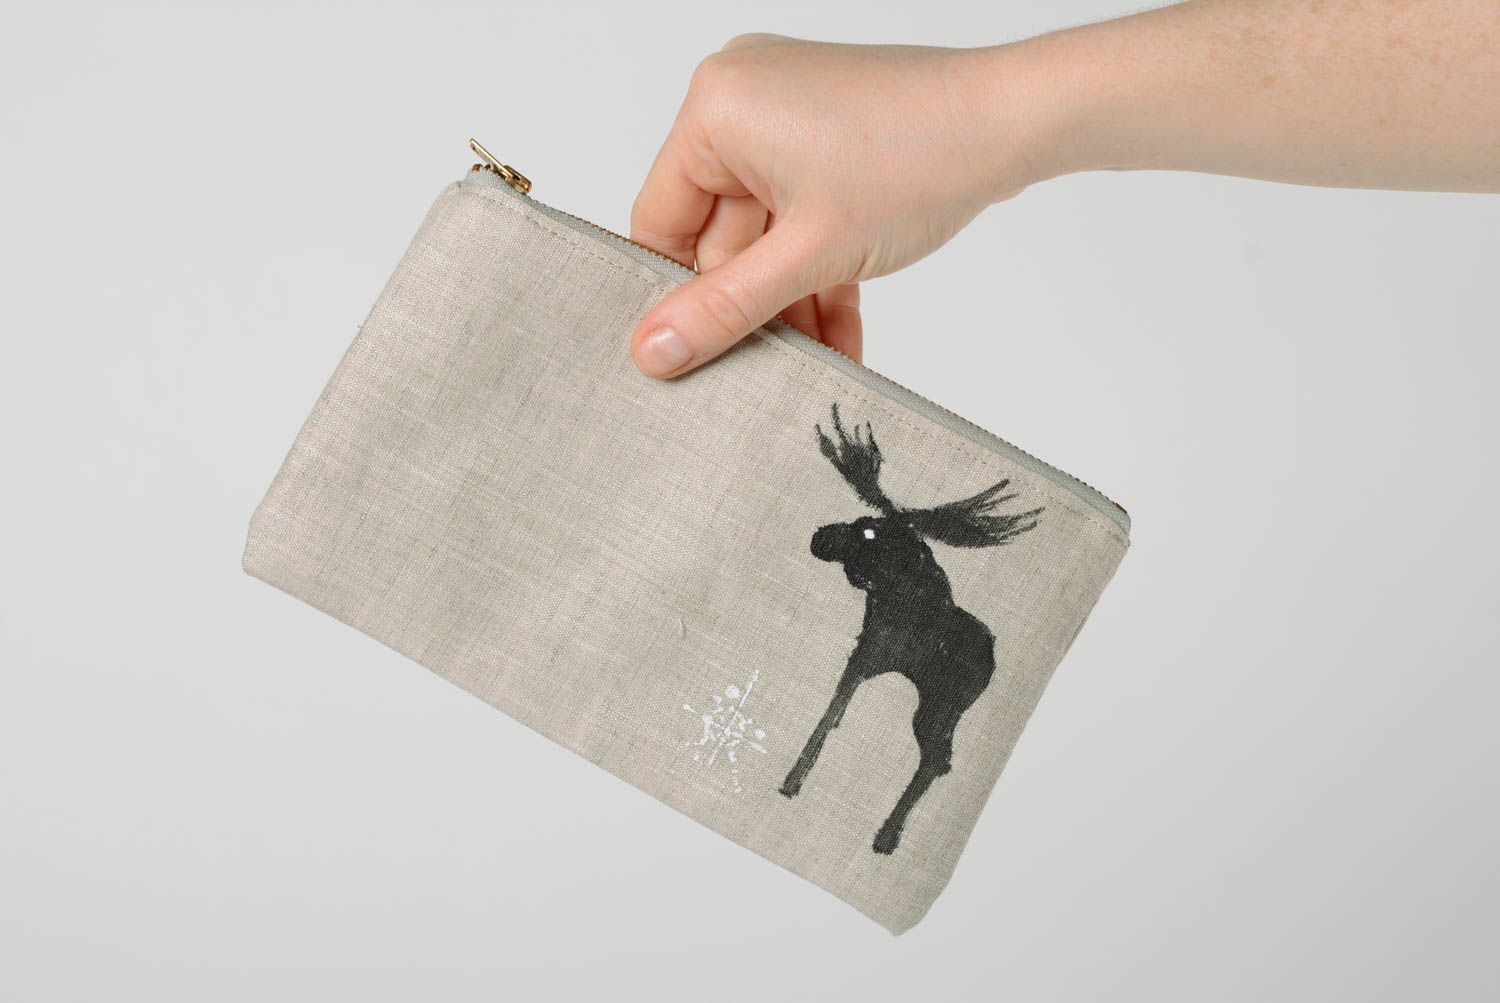 Handmade cosmetic bag sewn of gray linen fabric with zipper and elk image photo 2